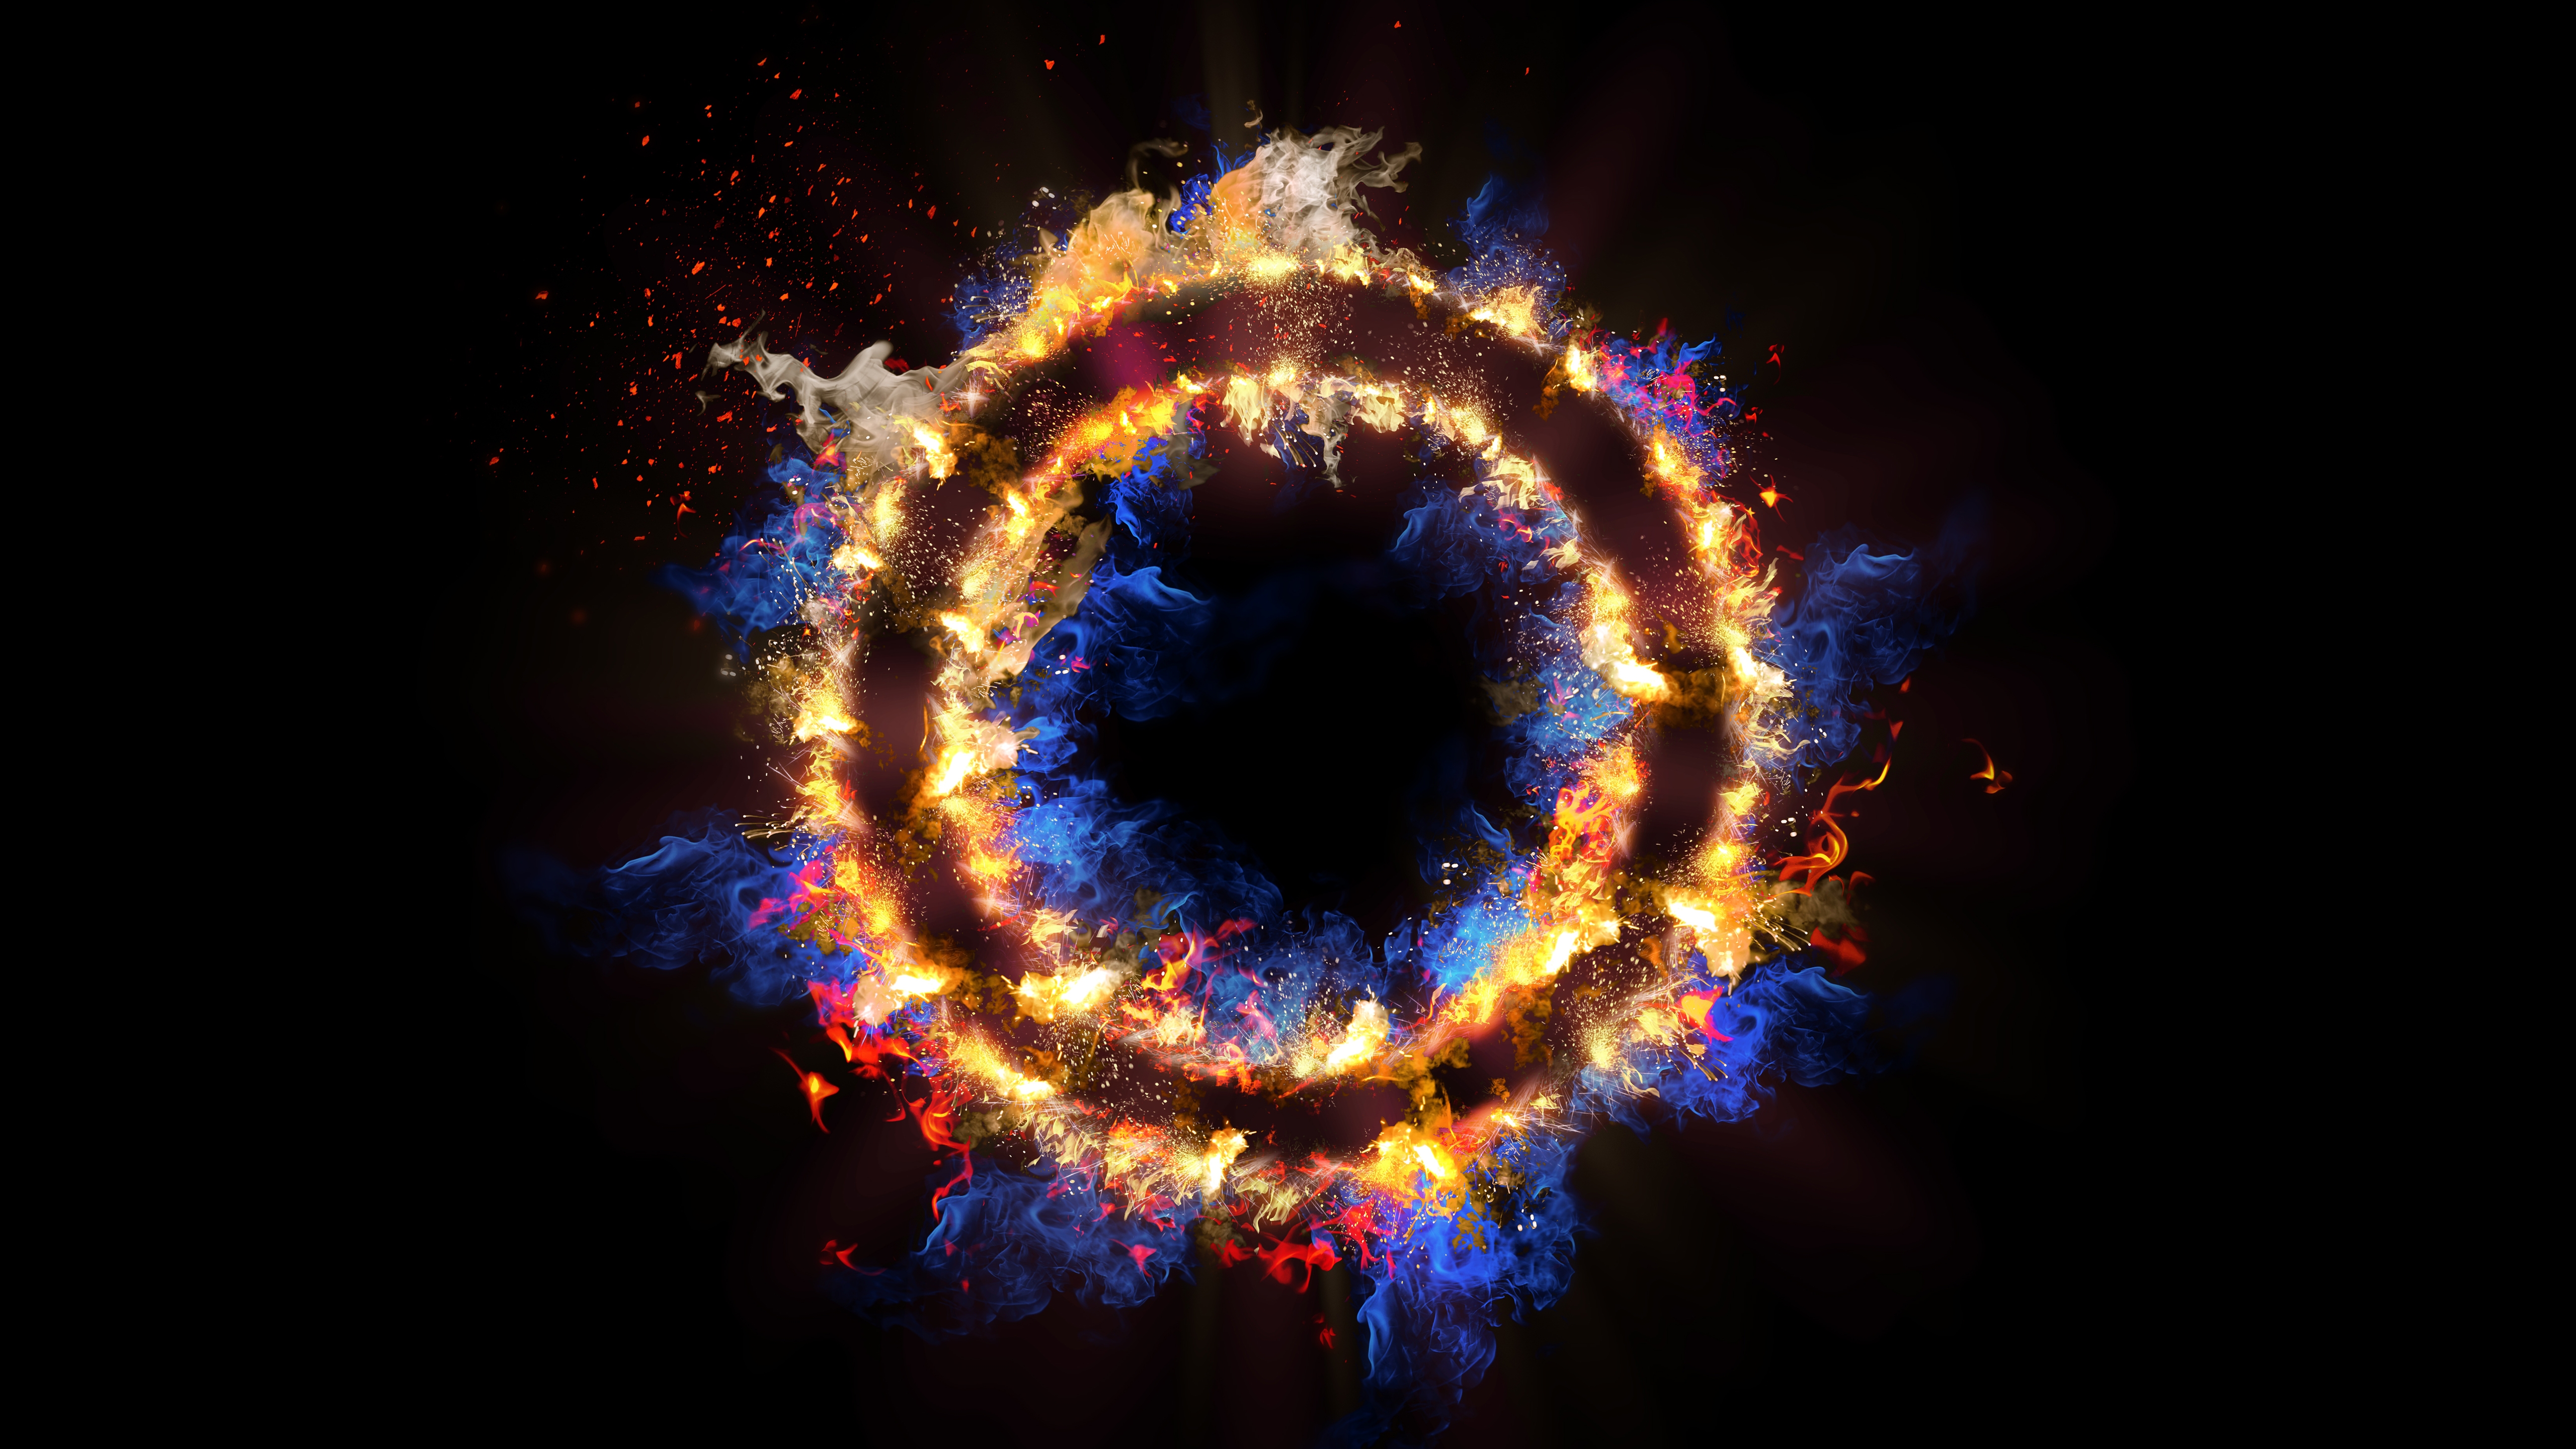 HD wallpaper, Black Background, Flames, 5K, Fire Ring, Energy, Circle